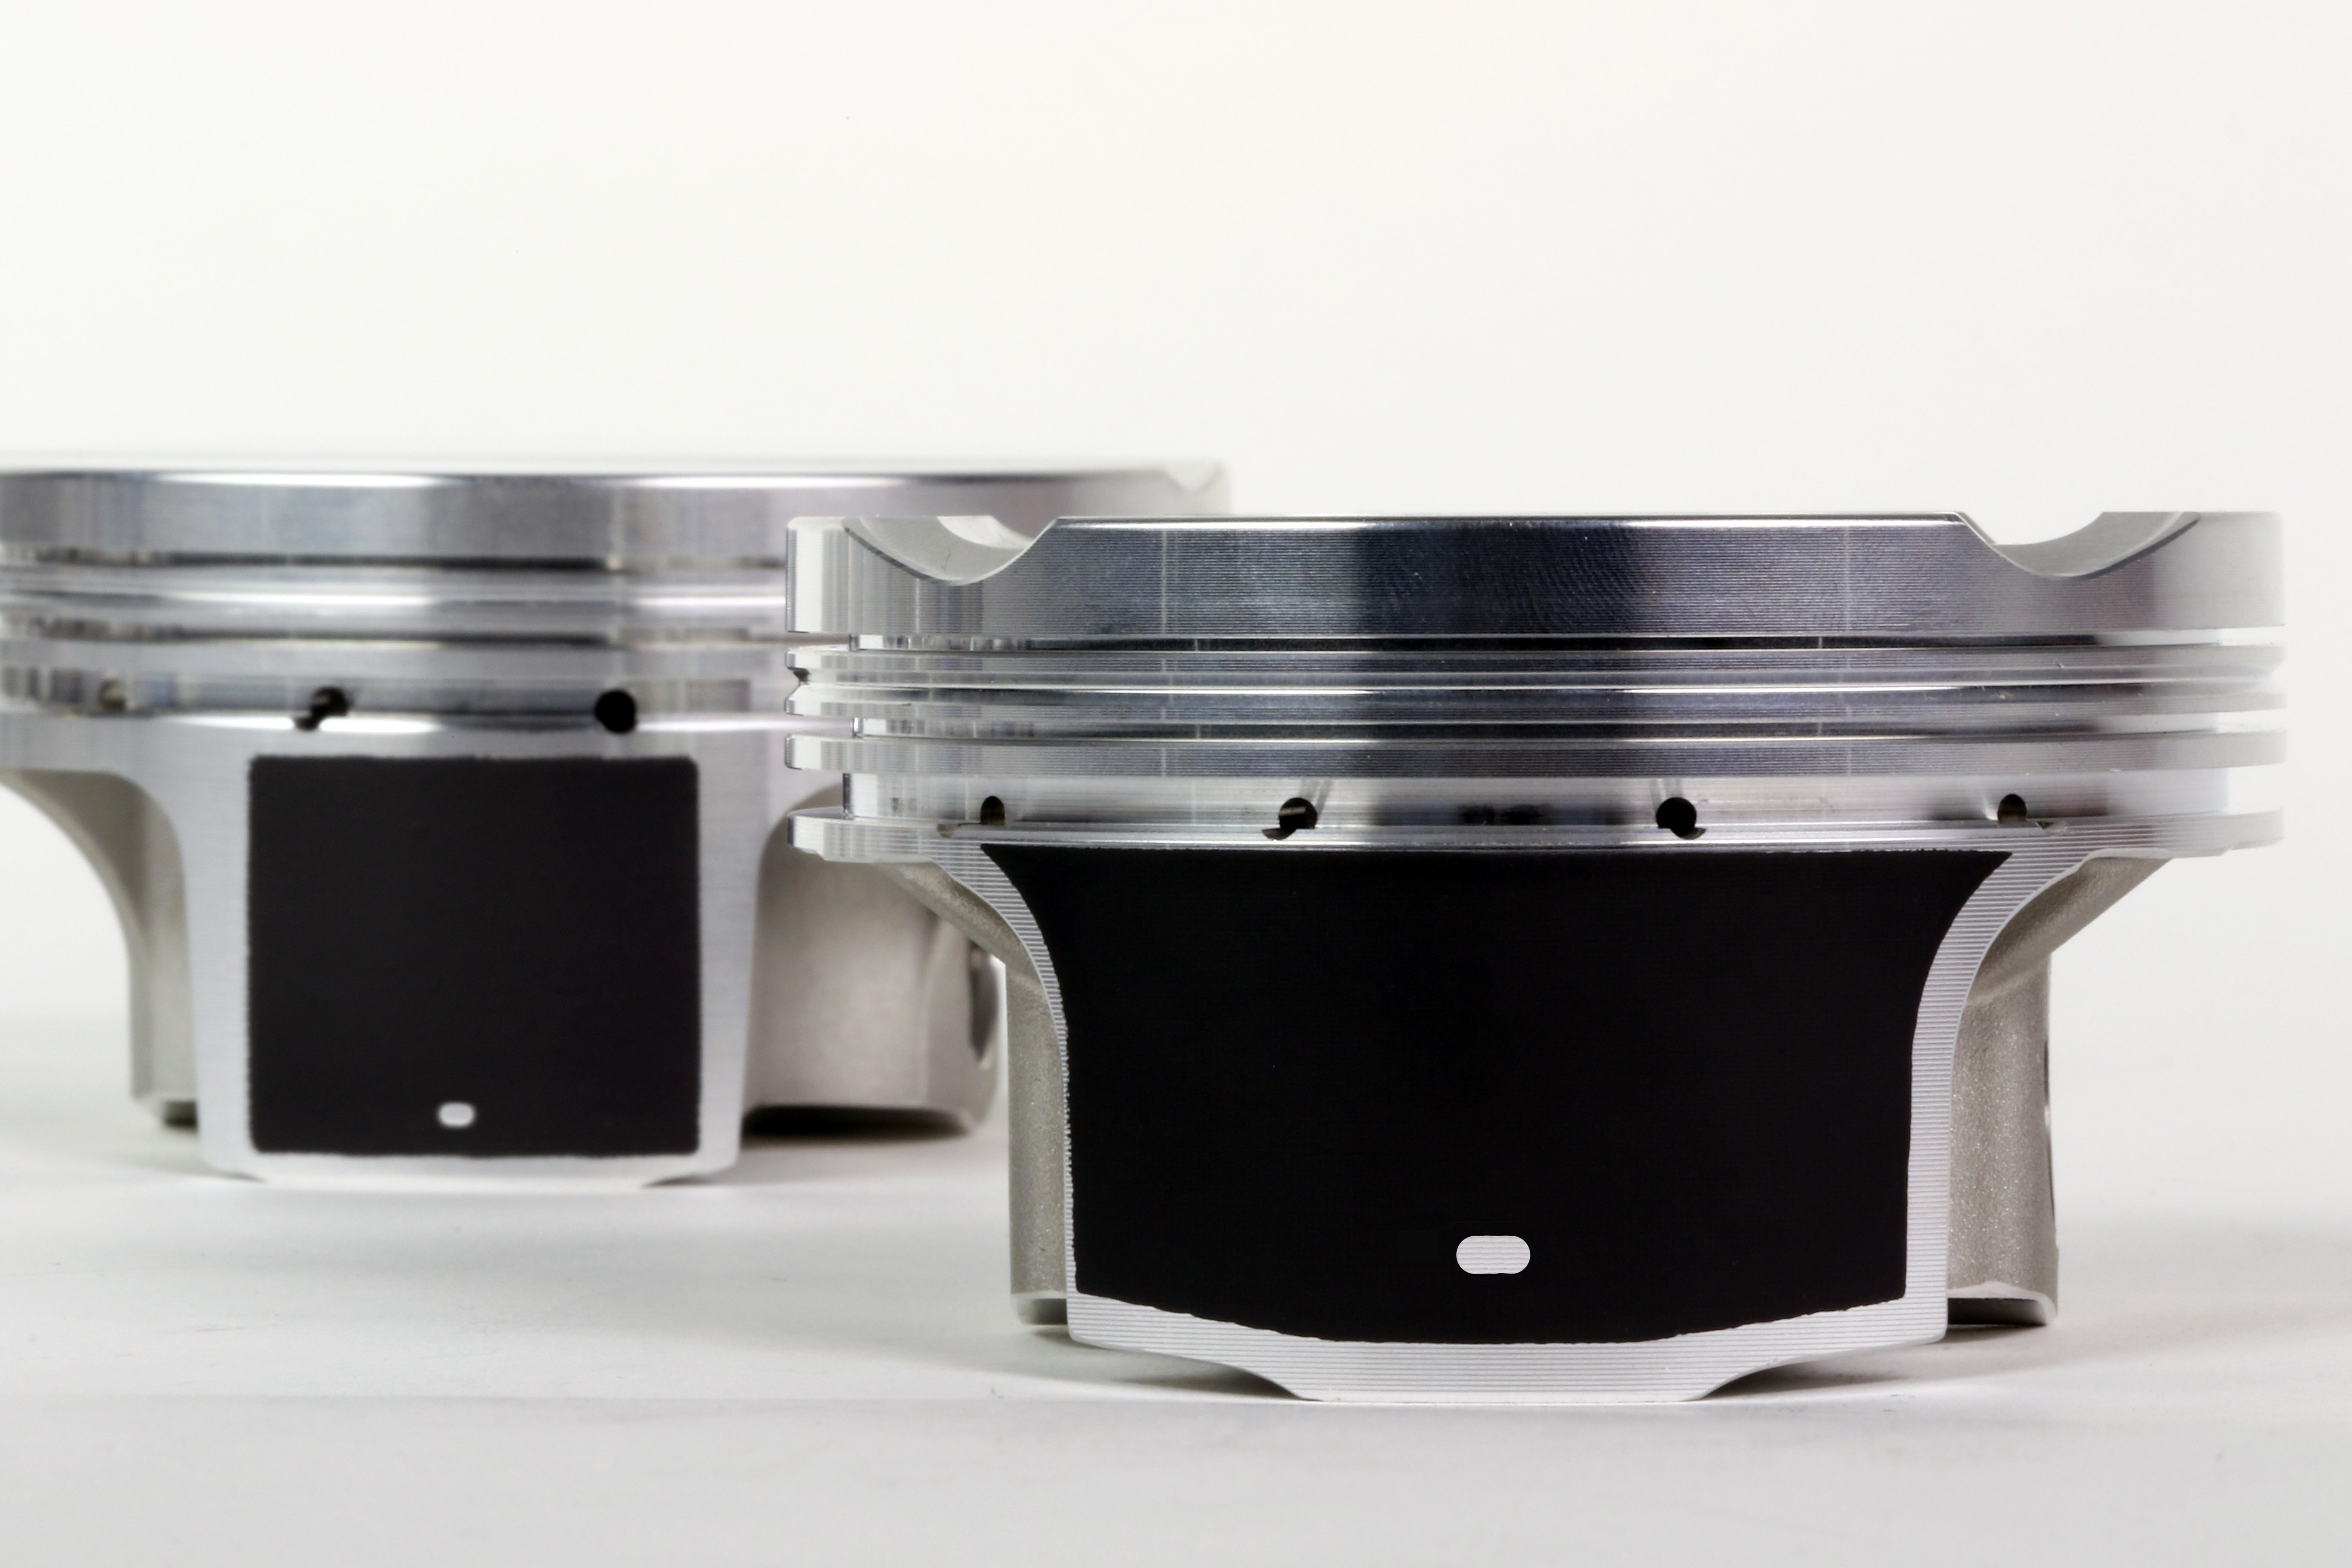 JE's Patented Perfect Skirt Coating Is A Breakthrough In Piston Technology